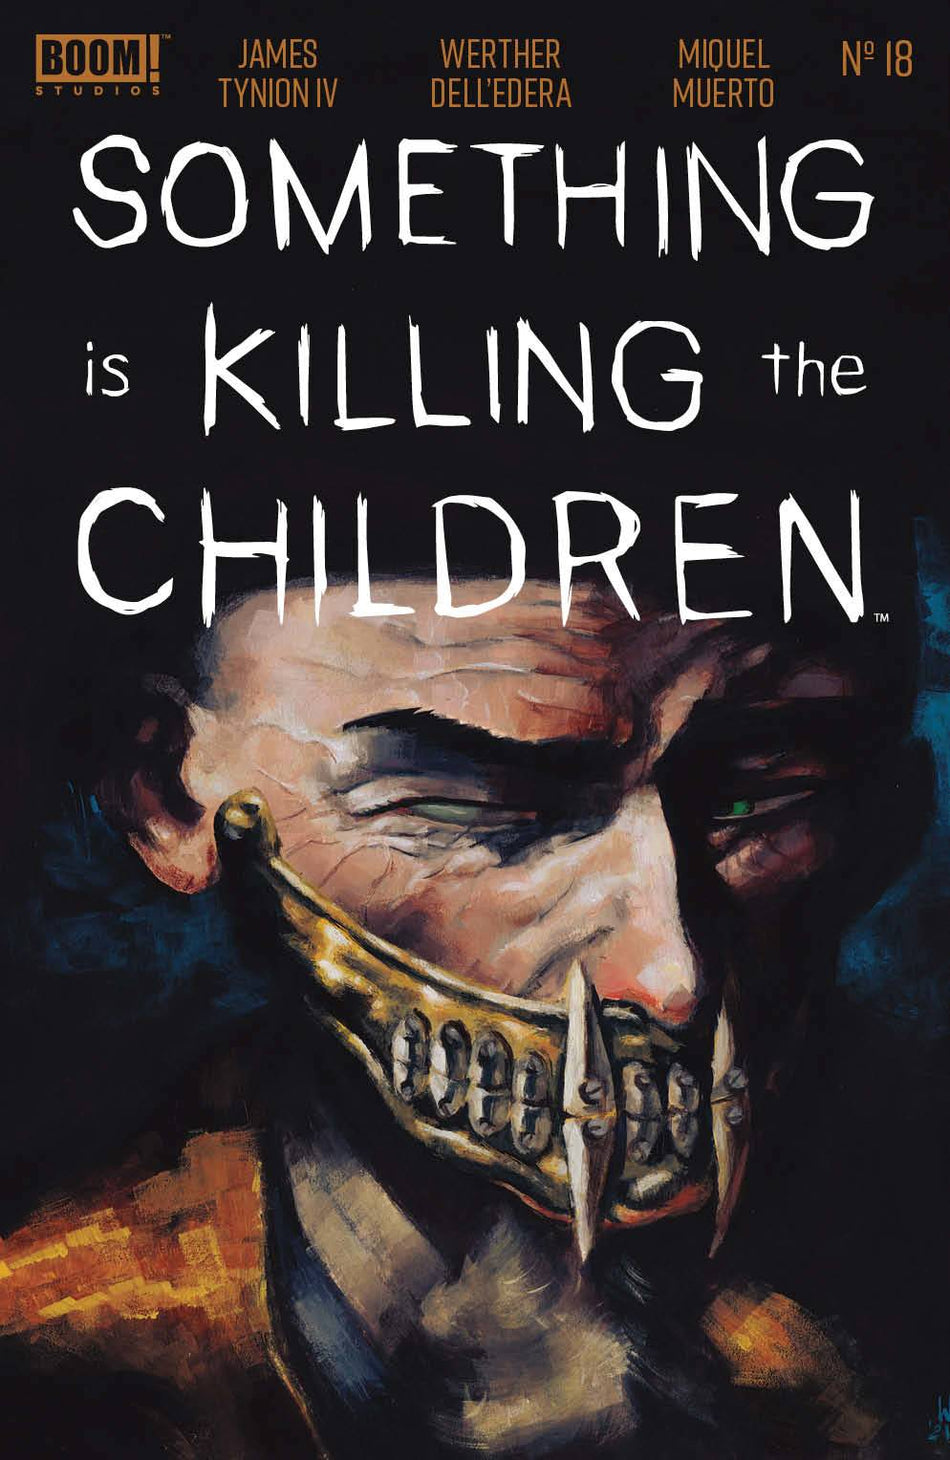 Photo of Something Is Killing the Children Issue 18 CVR A Dell Edera comic sold by Stronghold Collectibles